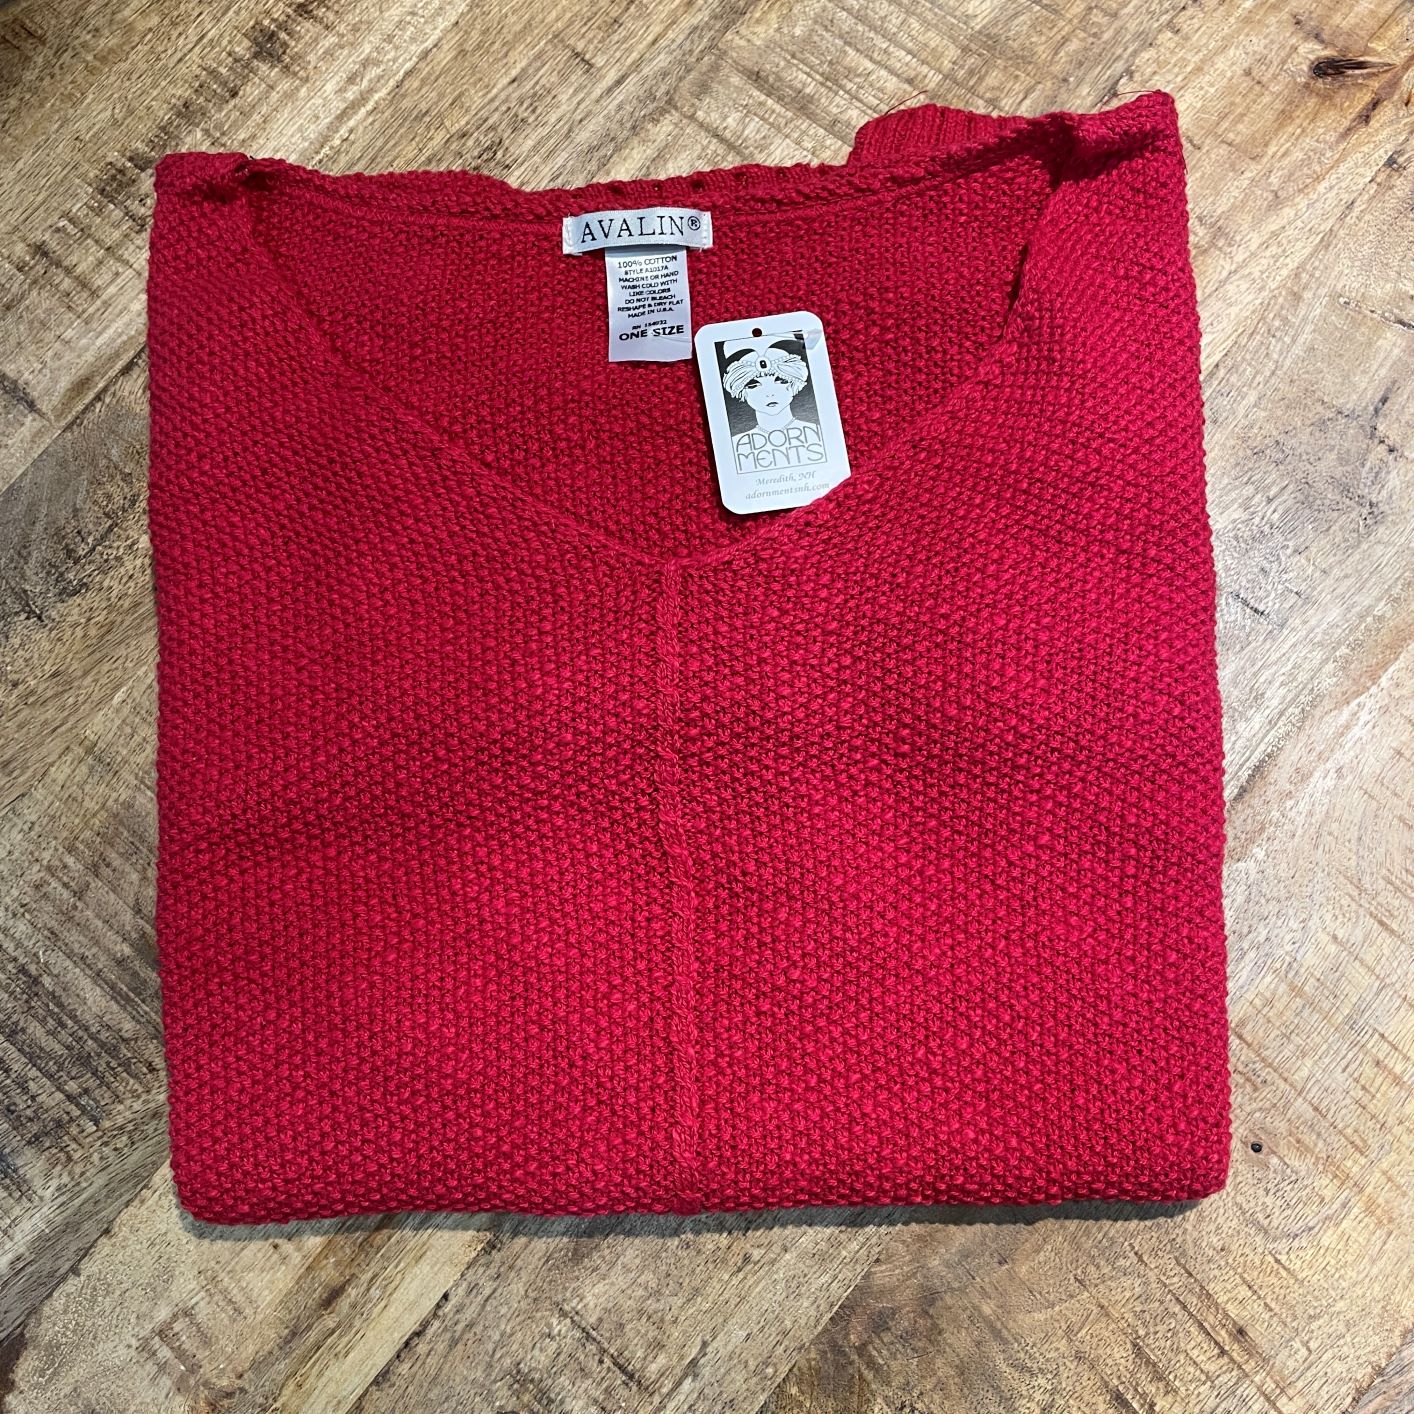 Red 100% cotton slub seed stitch sweater by Avalin. Features long sleeves, v-neck, center seam, ribbed cuffs and ribbed straight hem with side slits. Falls just below mid hip.